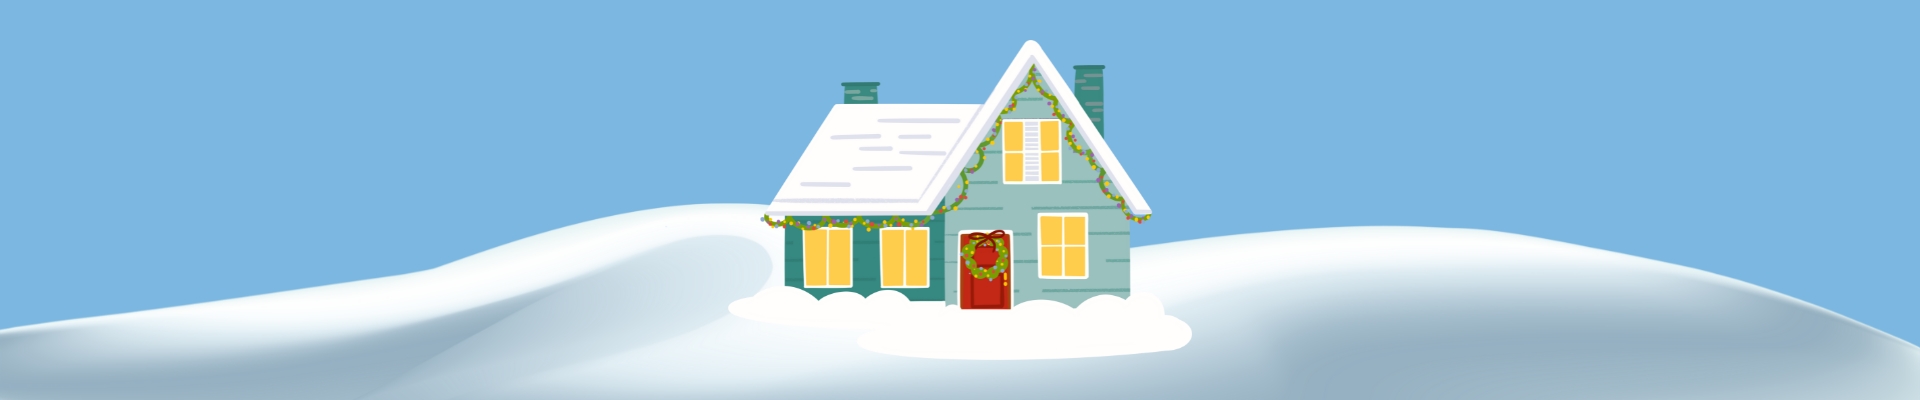 Graphic of a house decorated for the holidays in the middle of a snowy hill.